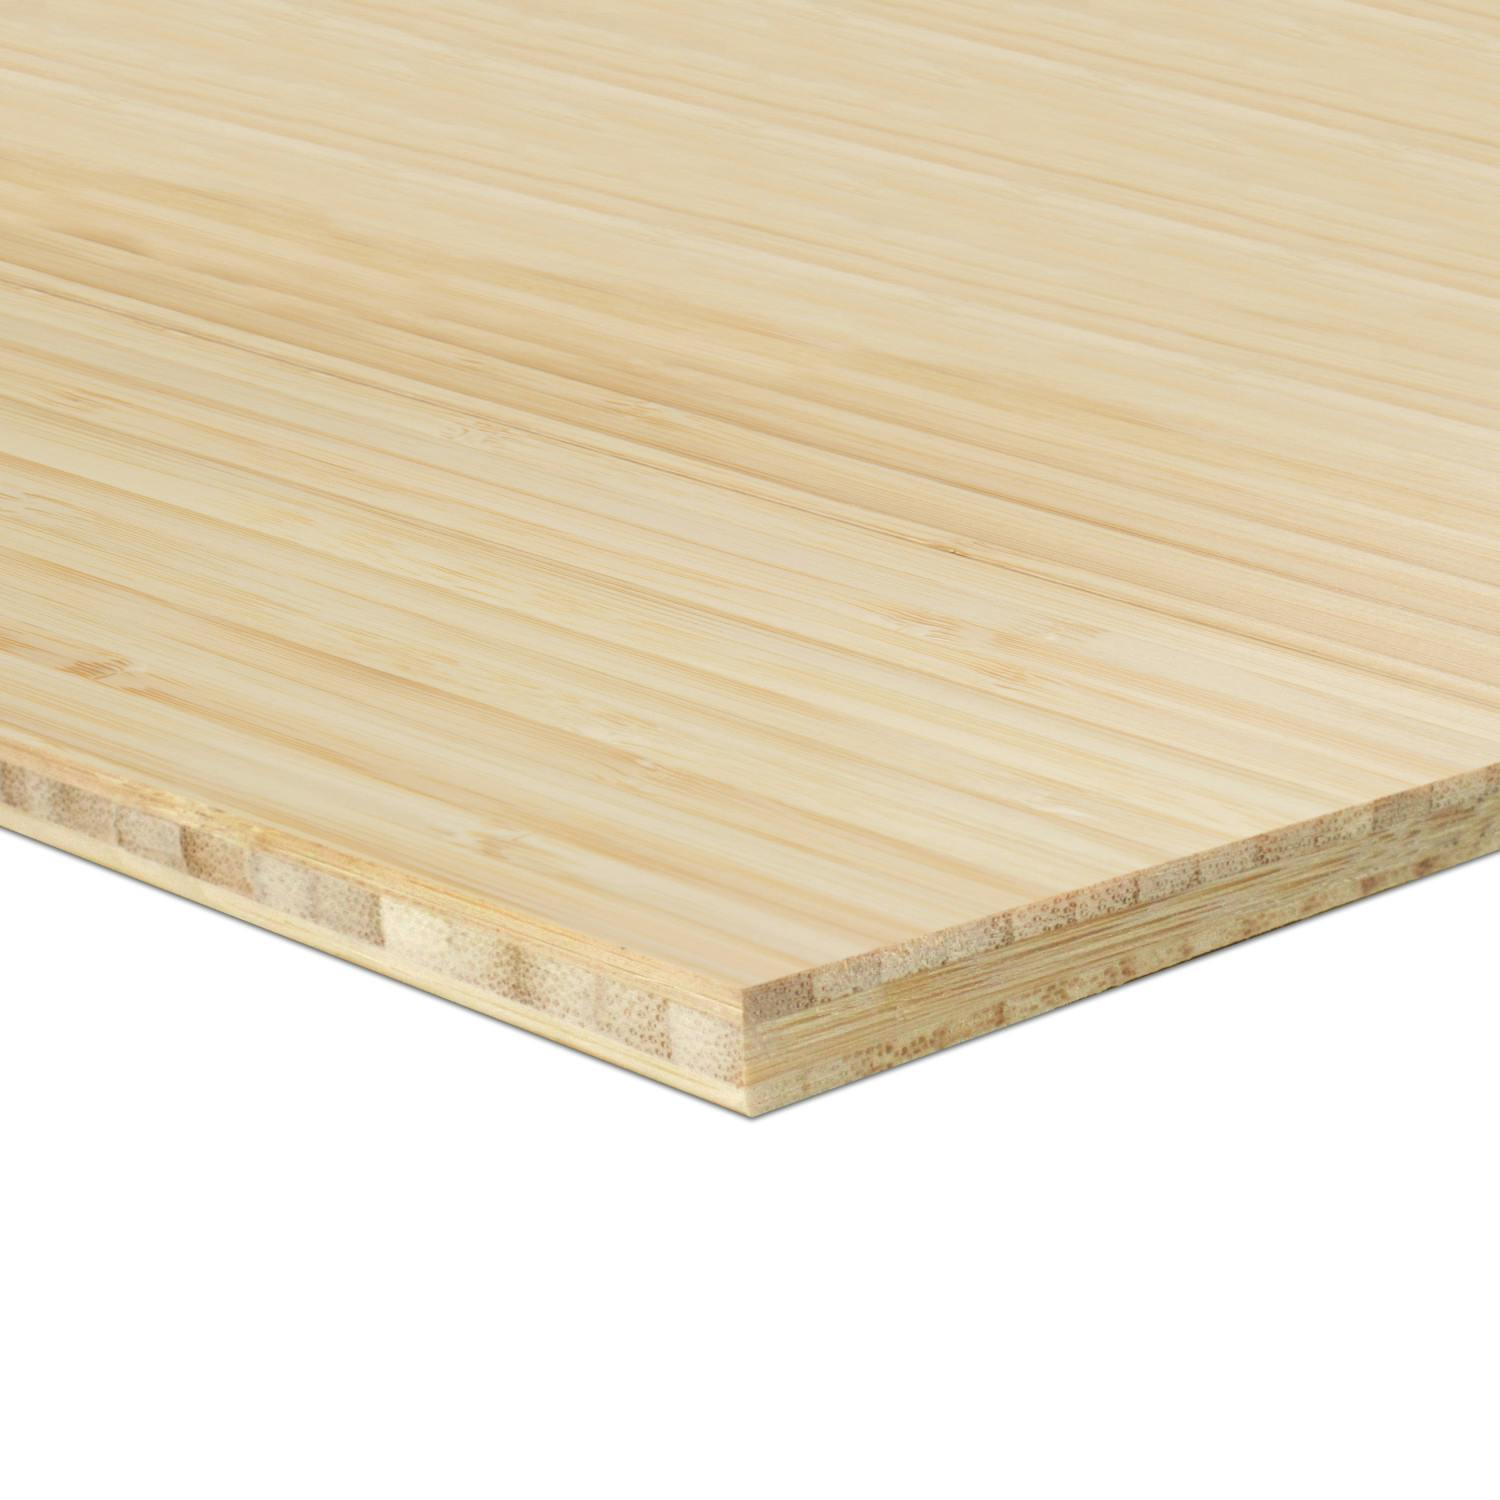 SPECIAL ORDER Bamboo Plywood - 3ply 1/4 in. Vertical Natural